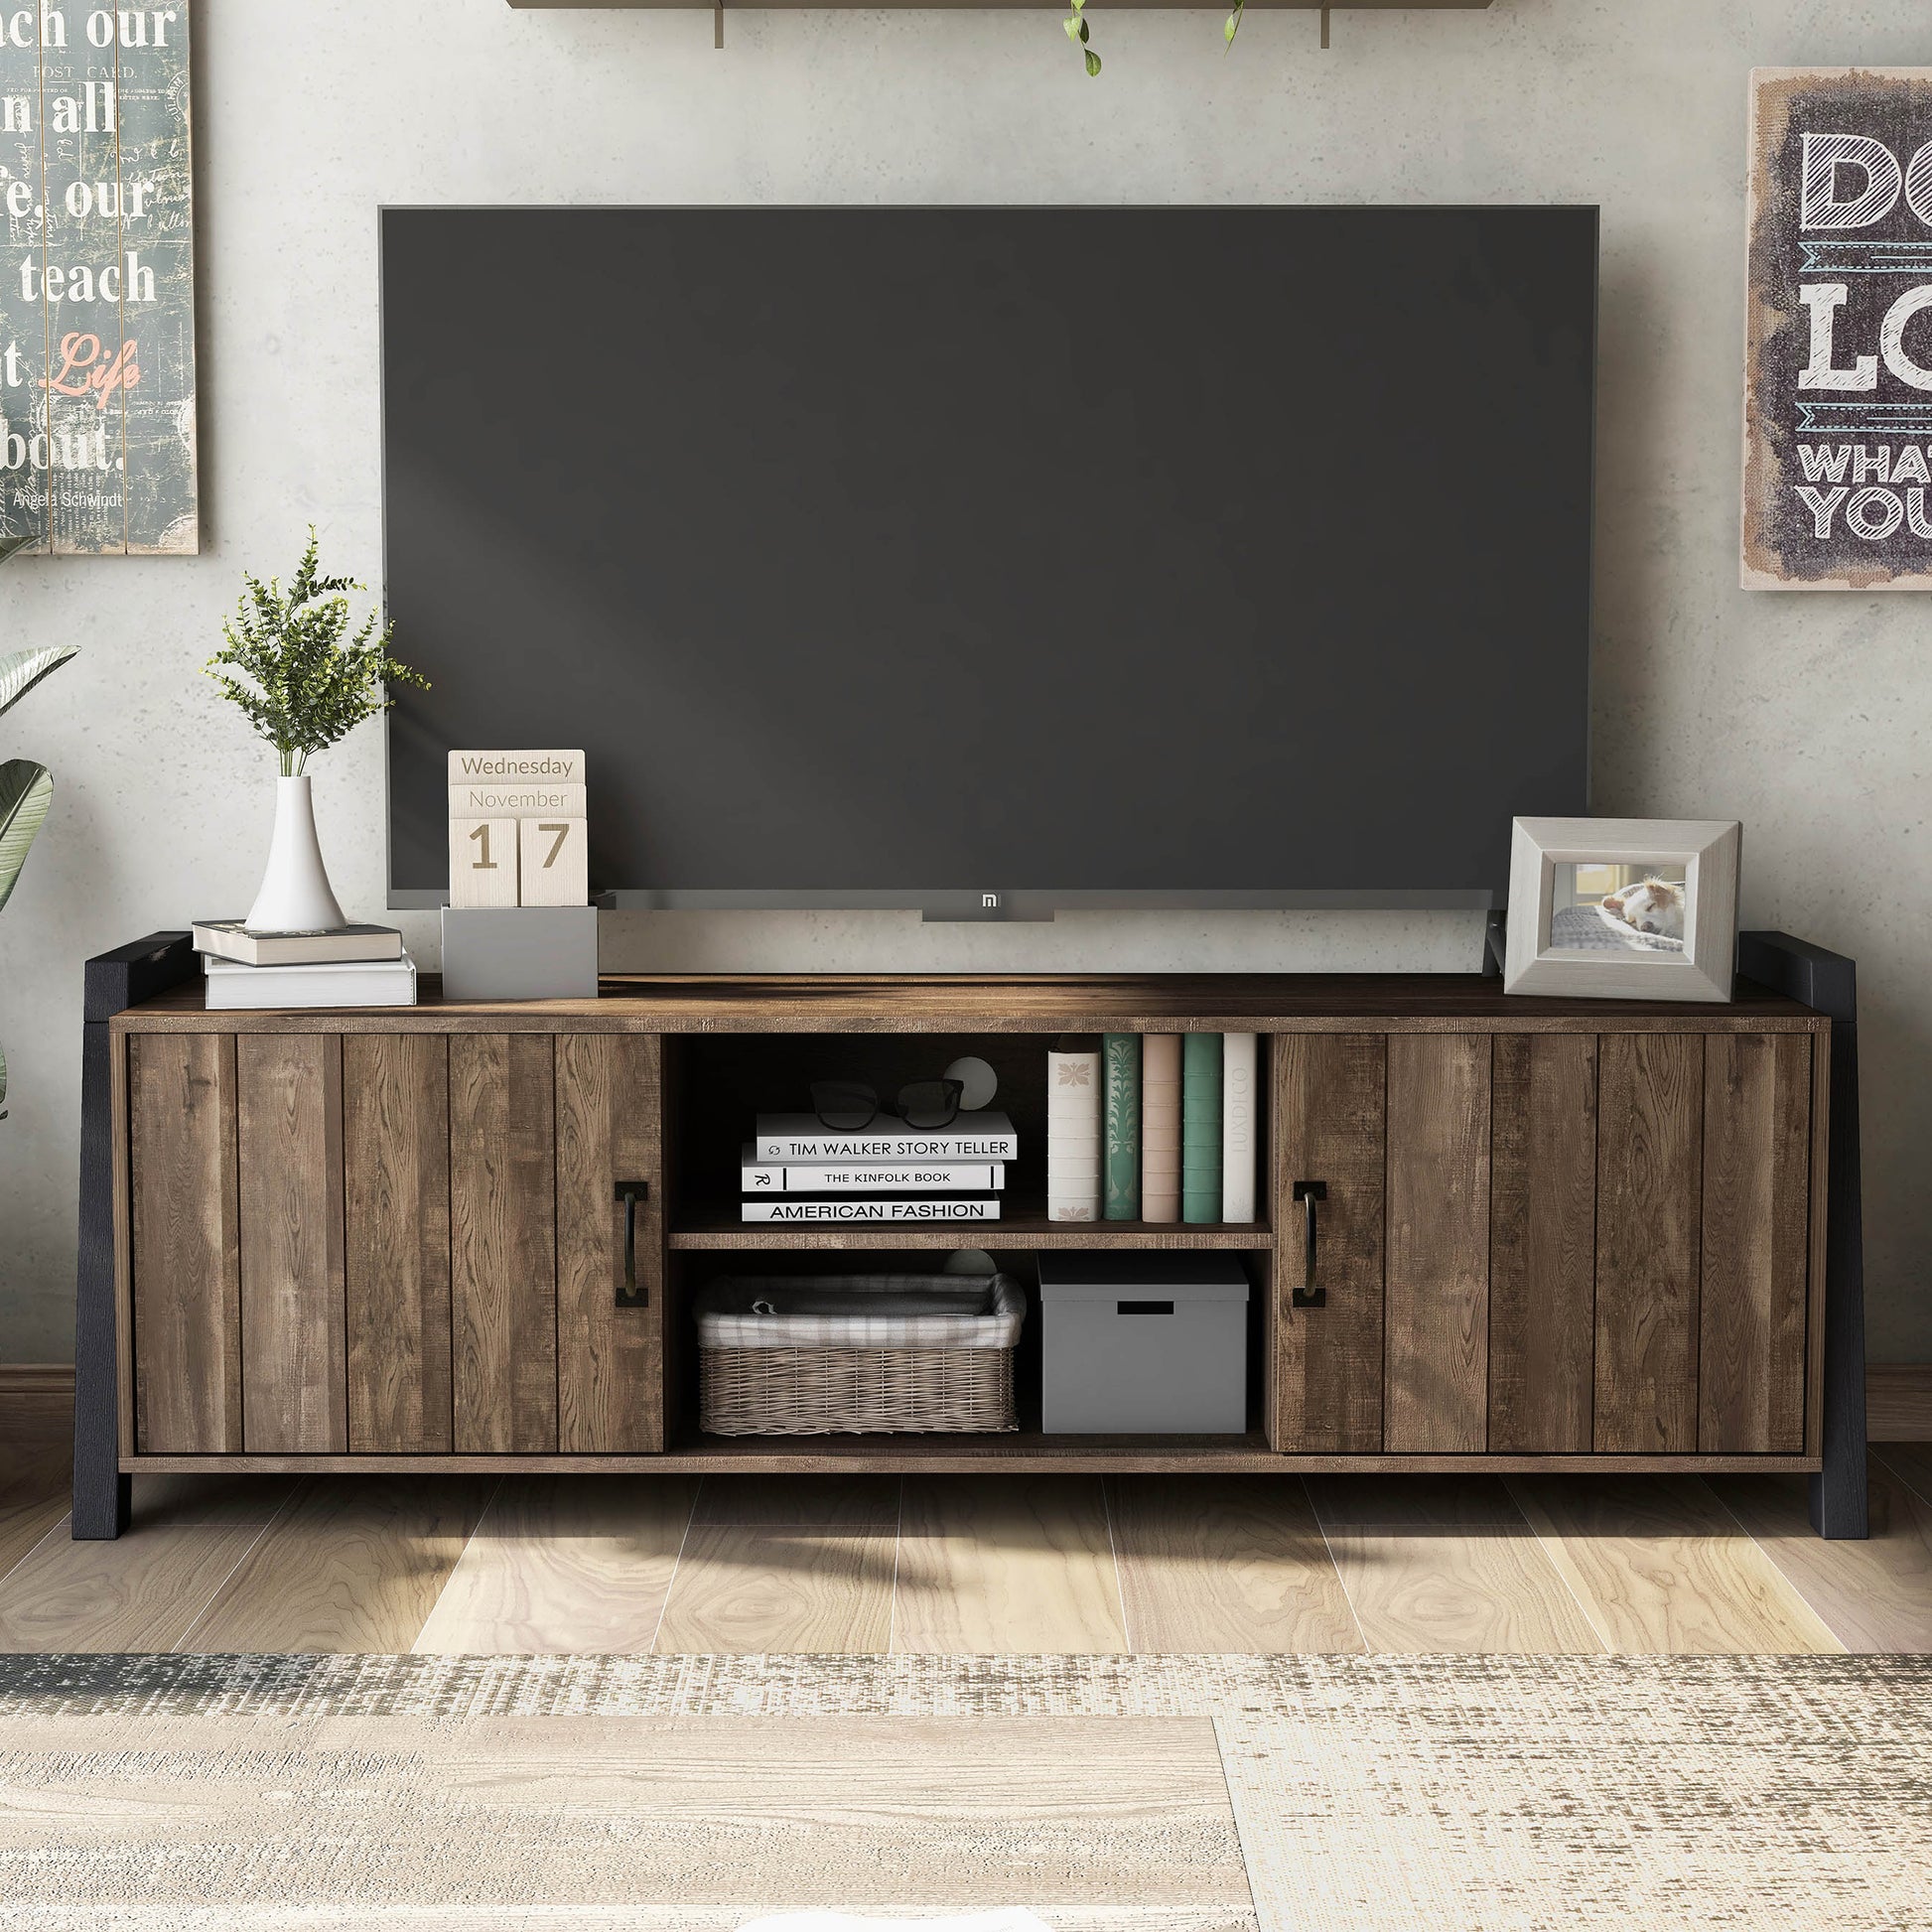 Front-facing farmhouse reclaimed oak and black six-shelf TV stand in a living room with accessories